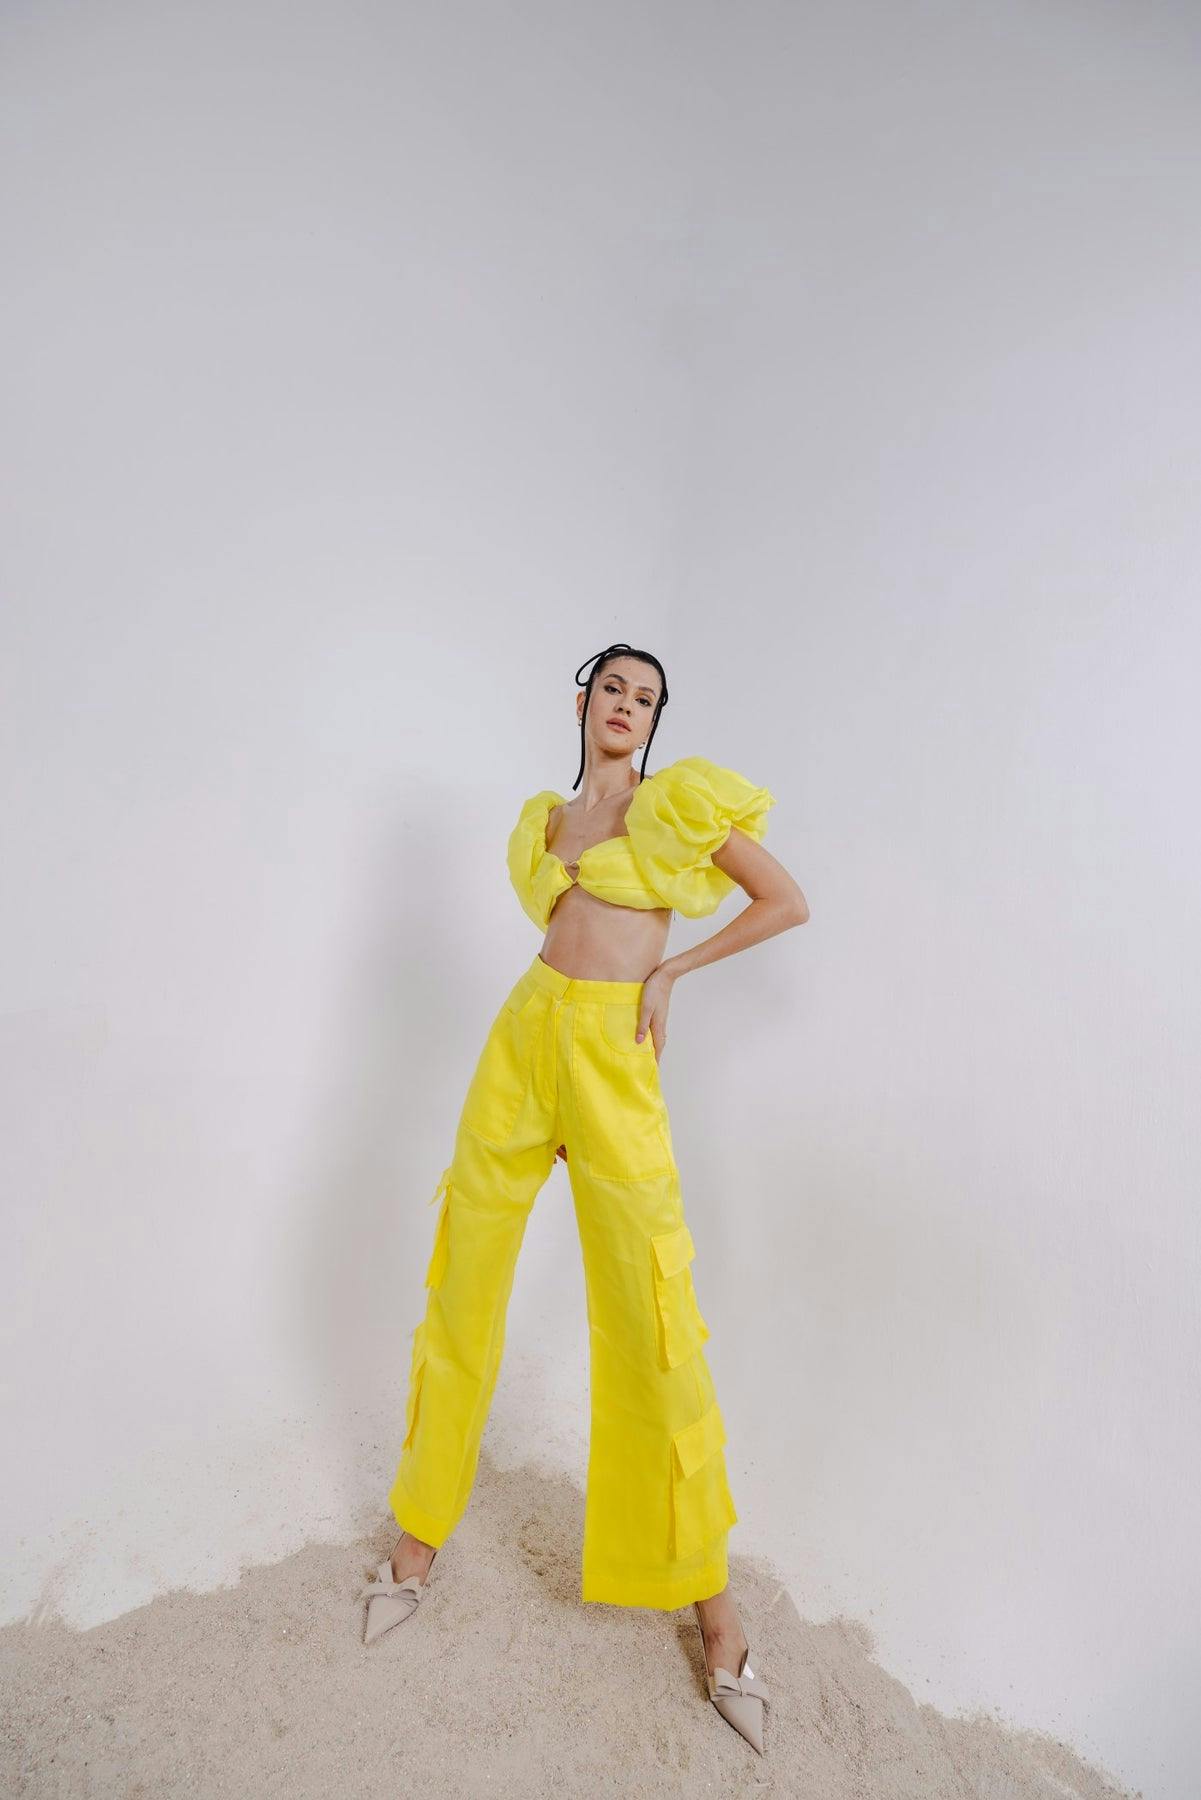 ENZO YELLOW CROP TOP & PANTS, a product by July Issue